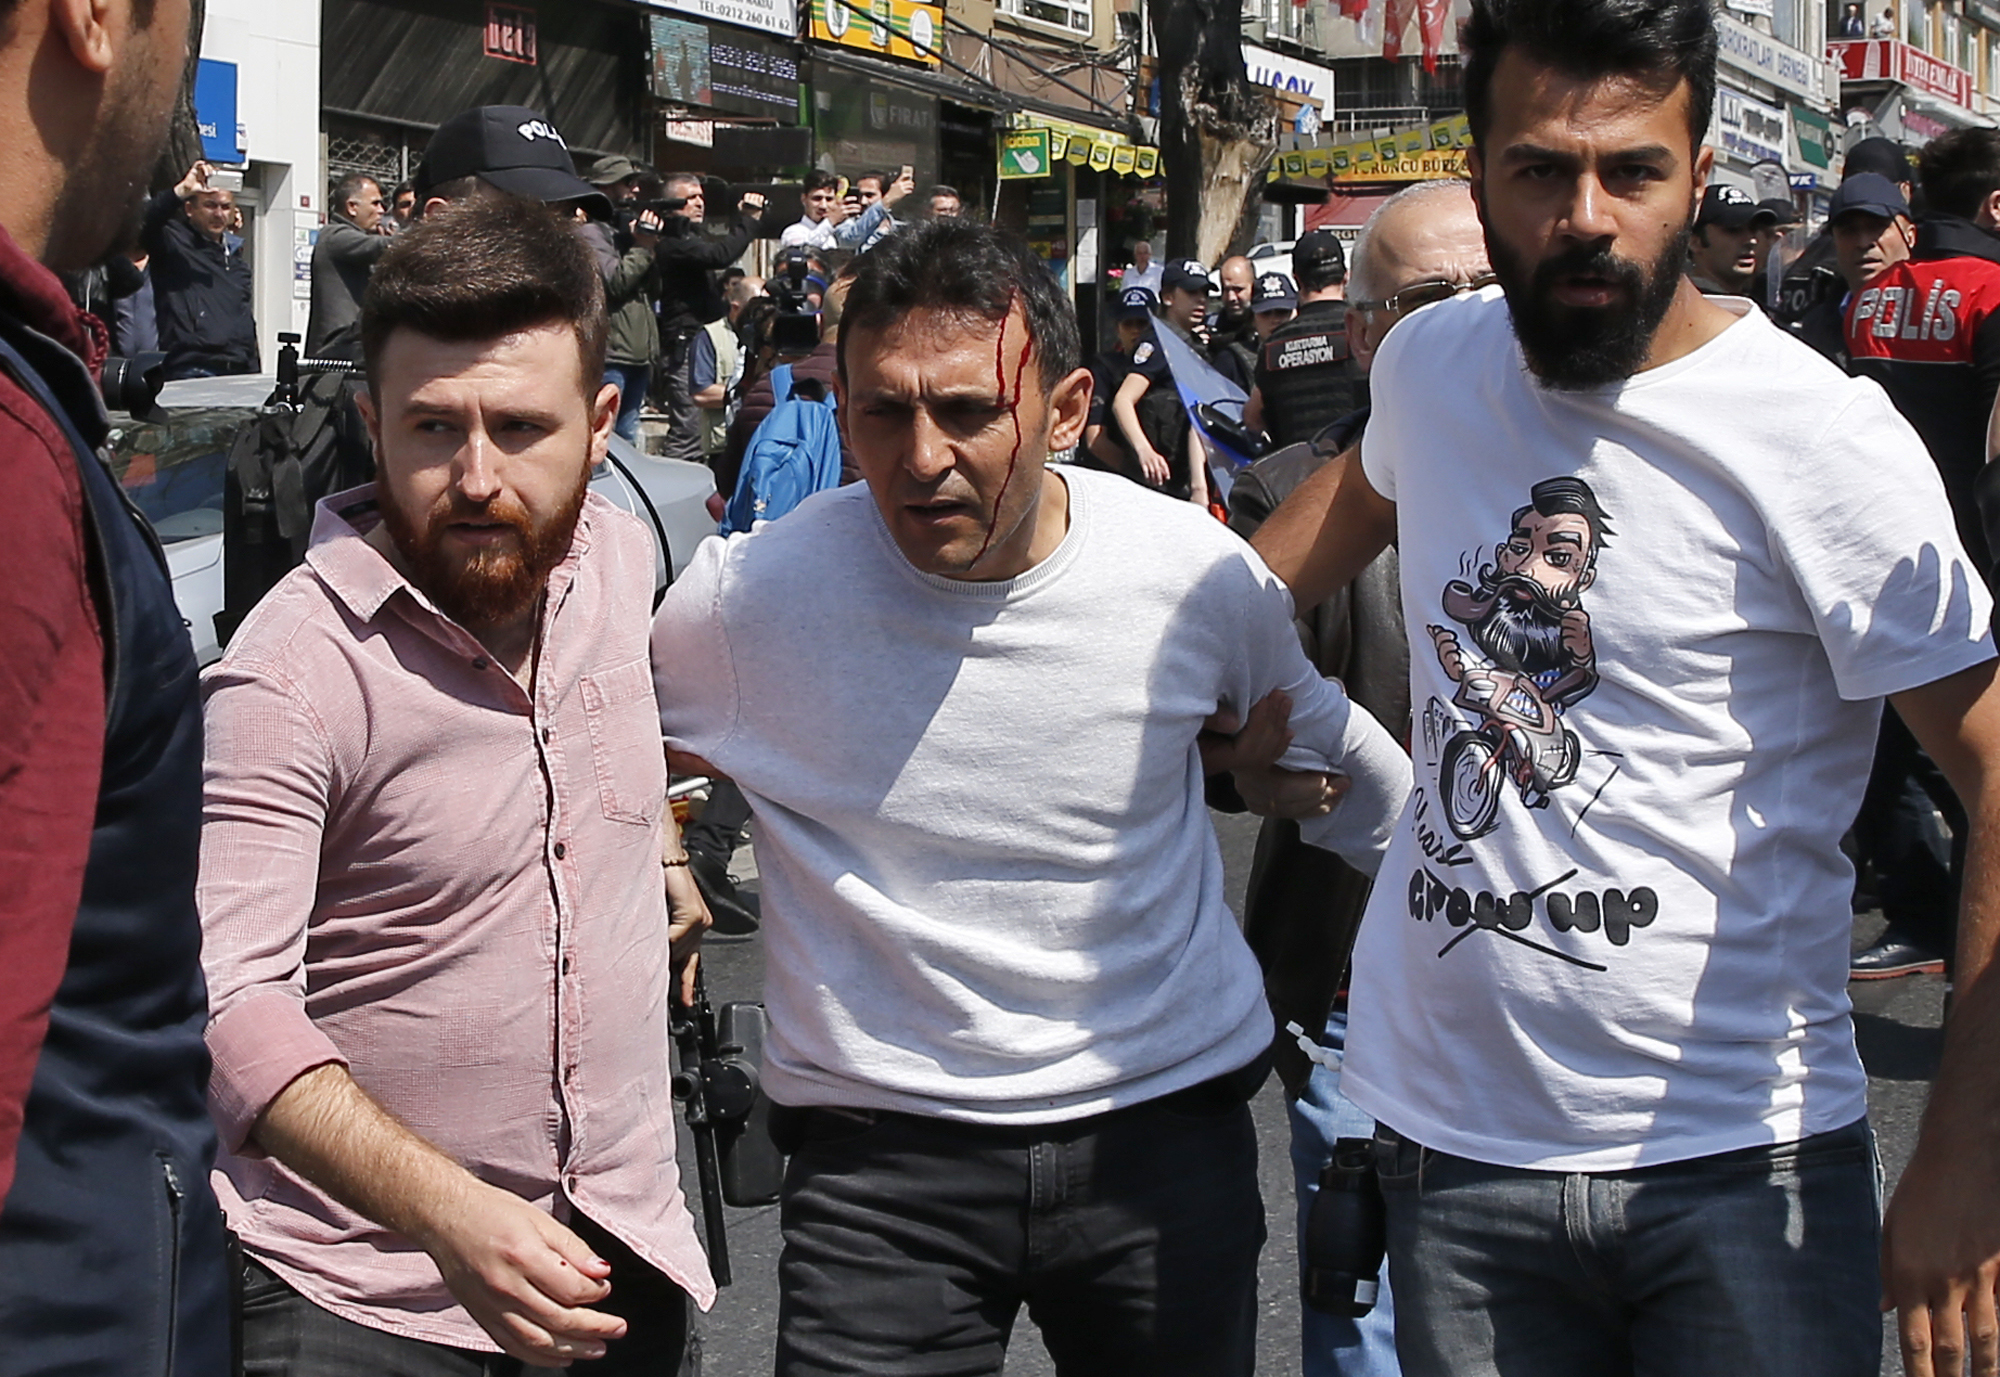 Turkish police officers in plain clothes detain a wounded demonstrator, during May Day protests in Istanbul, Tuesday, May 1, 2018. Police in Istanbul detained dozens of demonstrators who tried to march toward Istanbul's symbolic Taksim Square in defiance of a ban by the government, citing security concerns. (AP Photo/Lefteris Pitarakis)